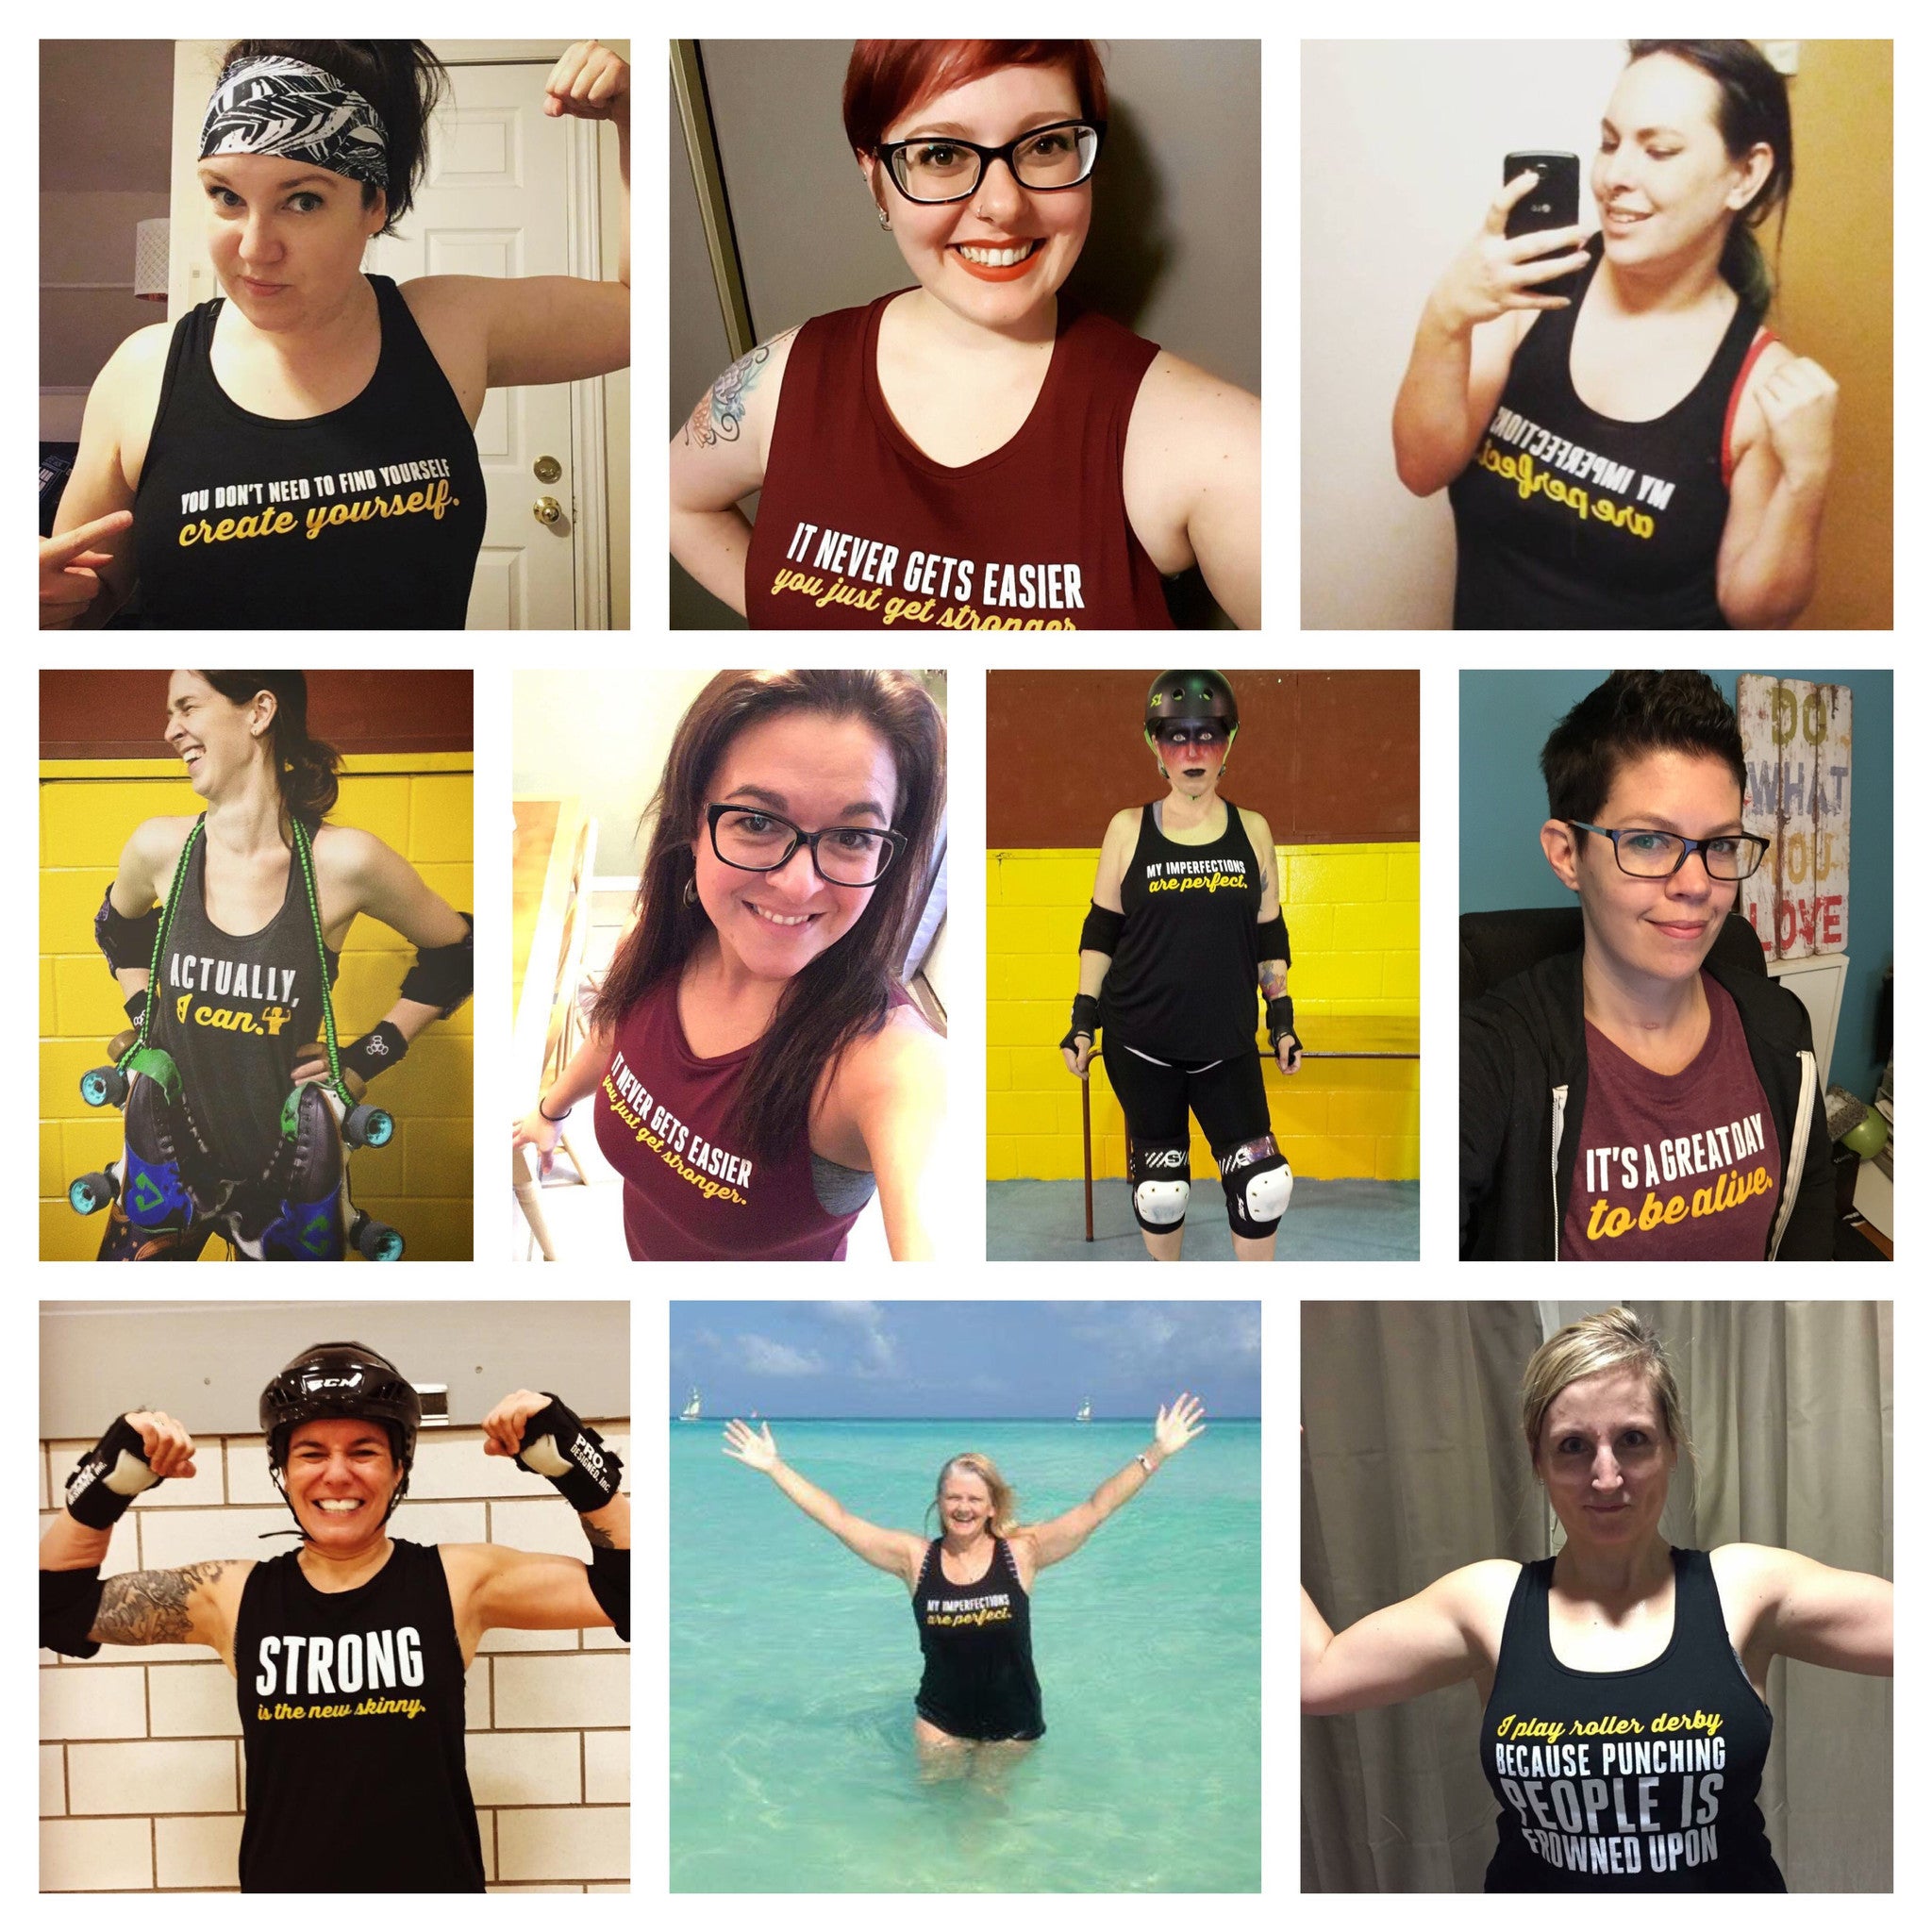 Tag us in your selfie for a chance to win a free shirt from Asskicker Ink!